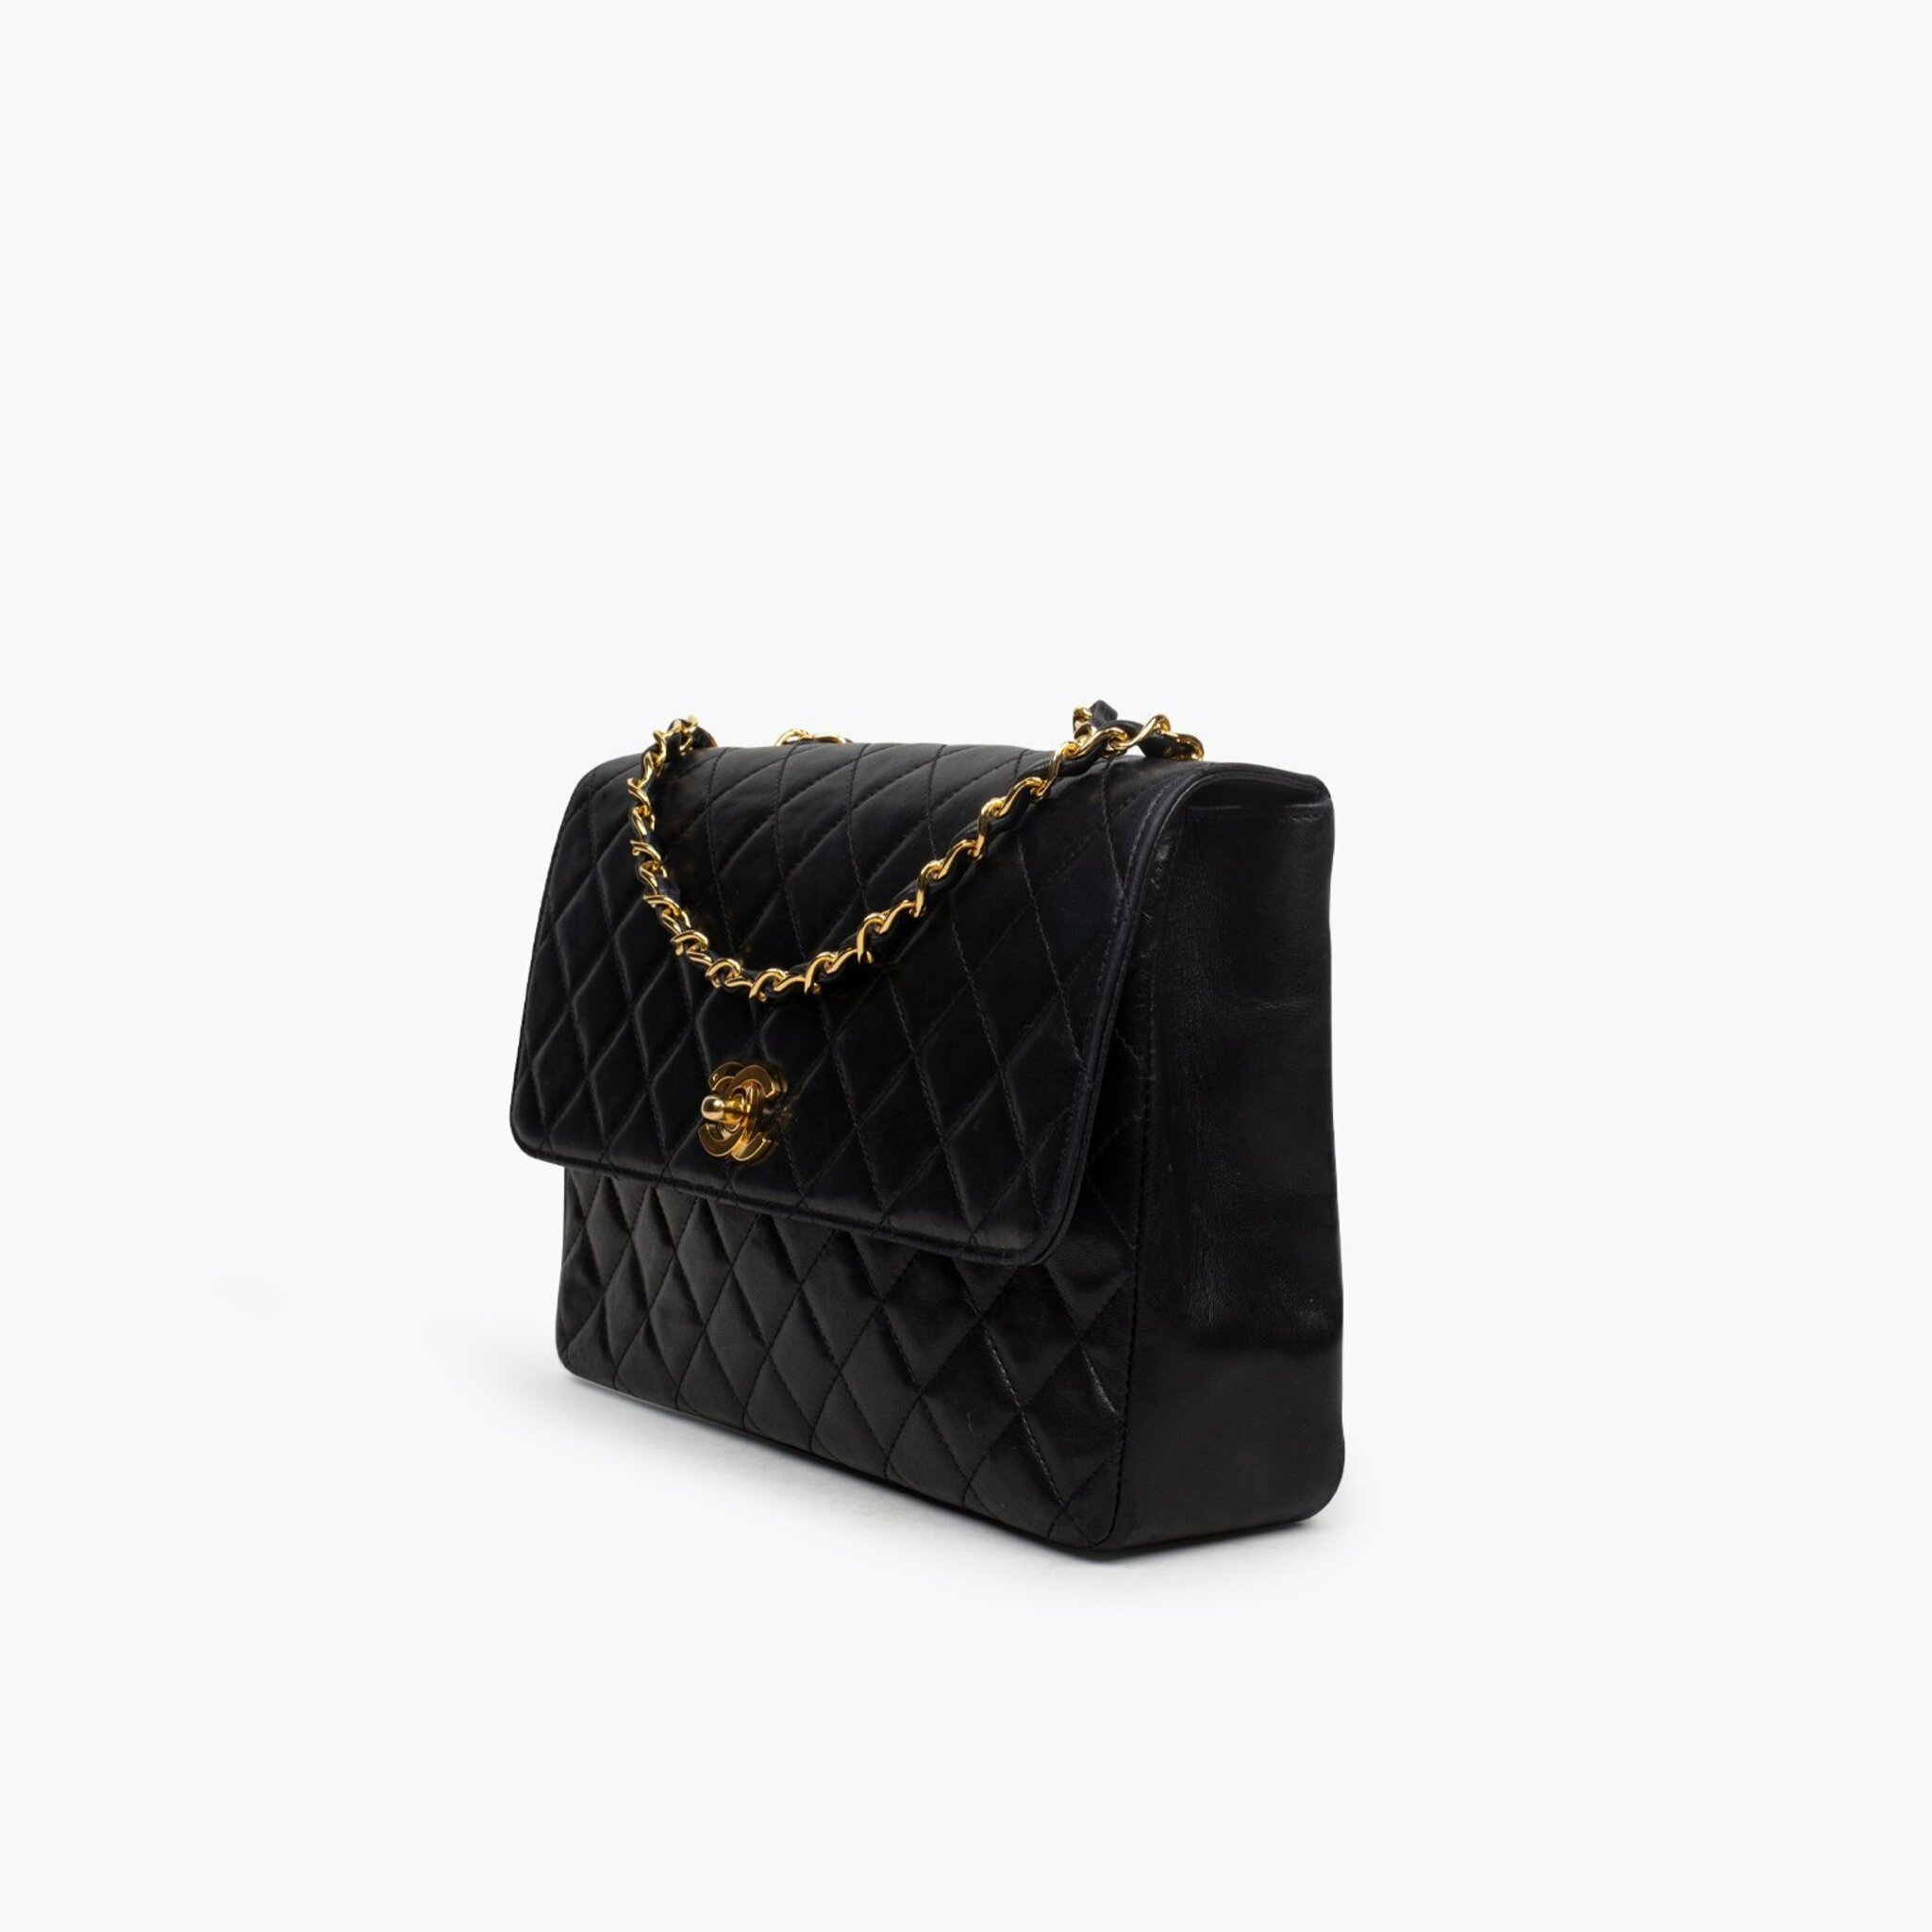 CHANEL VINTAGE JUMBO SINGLE FLAP BAG IN BLACK CHEVRON QUILTED LEATHER   Still in fashion